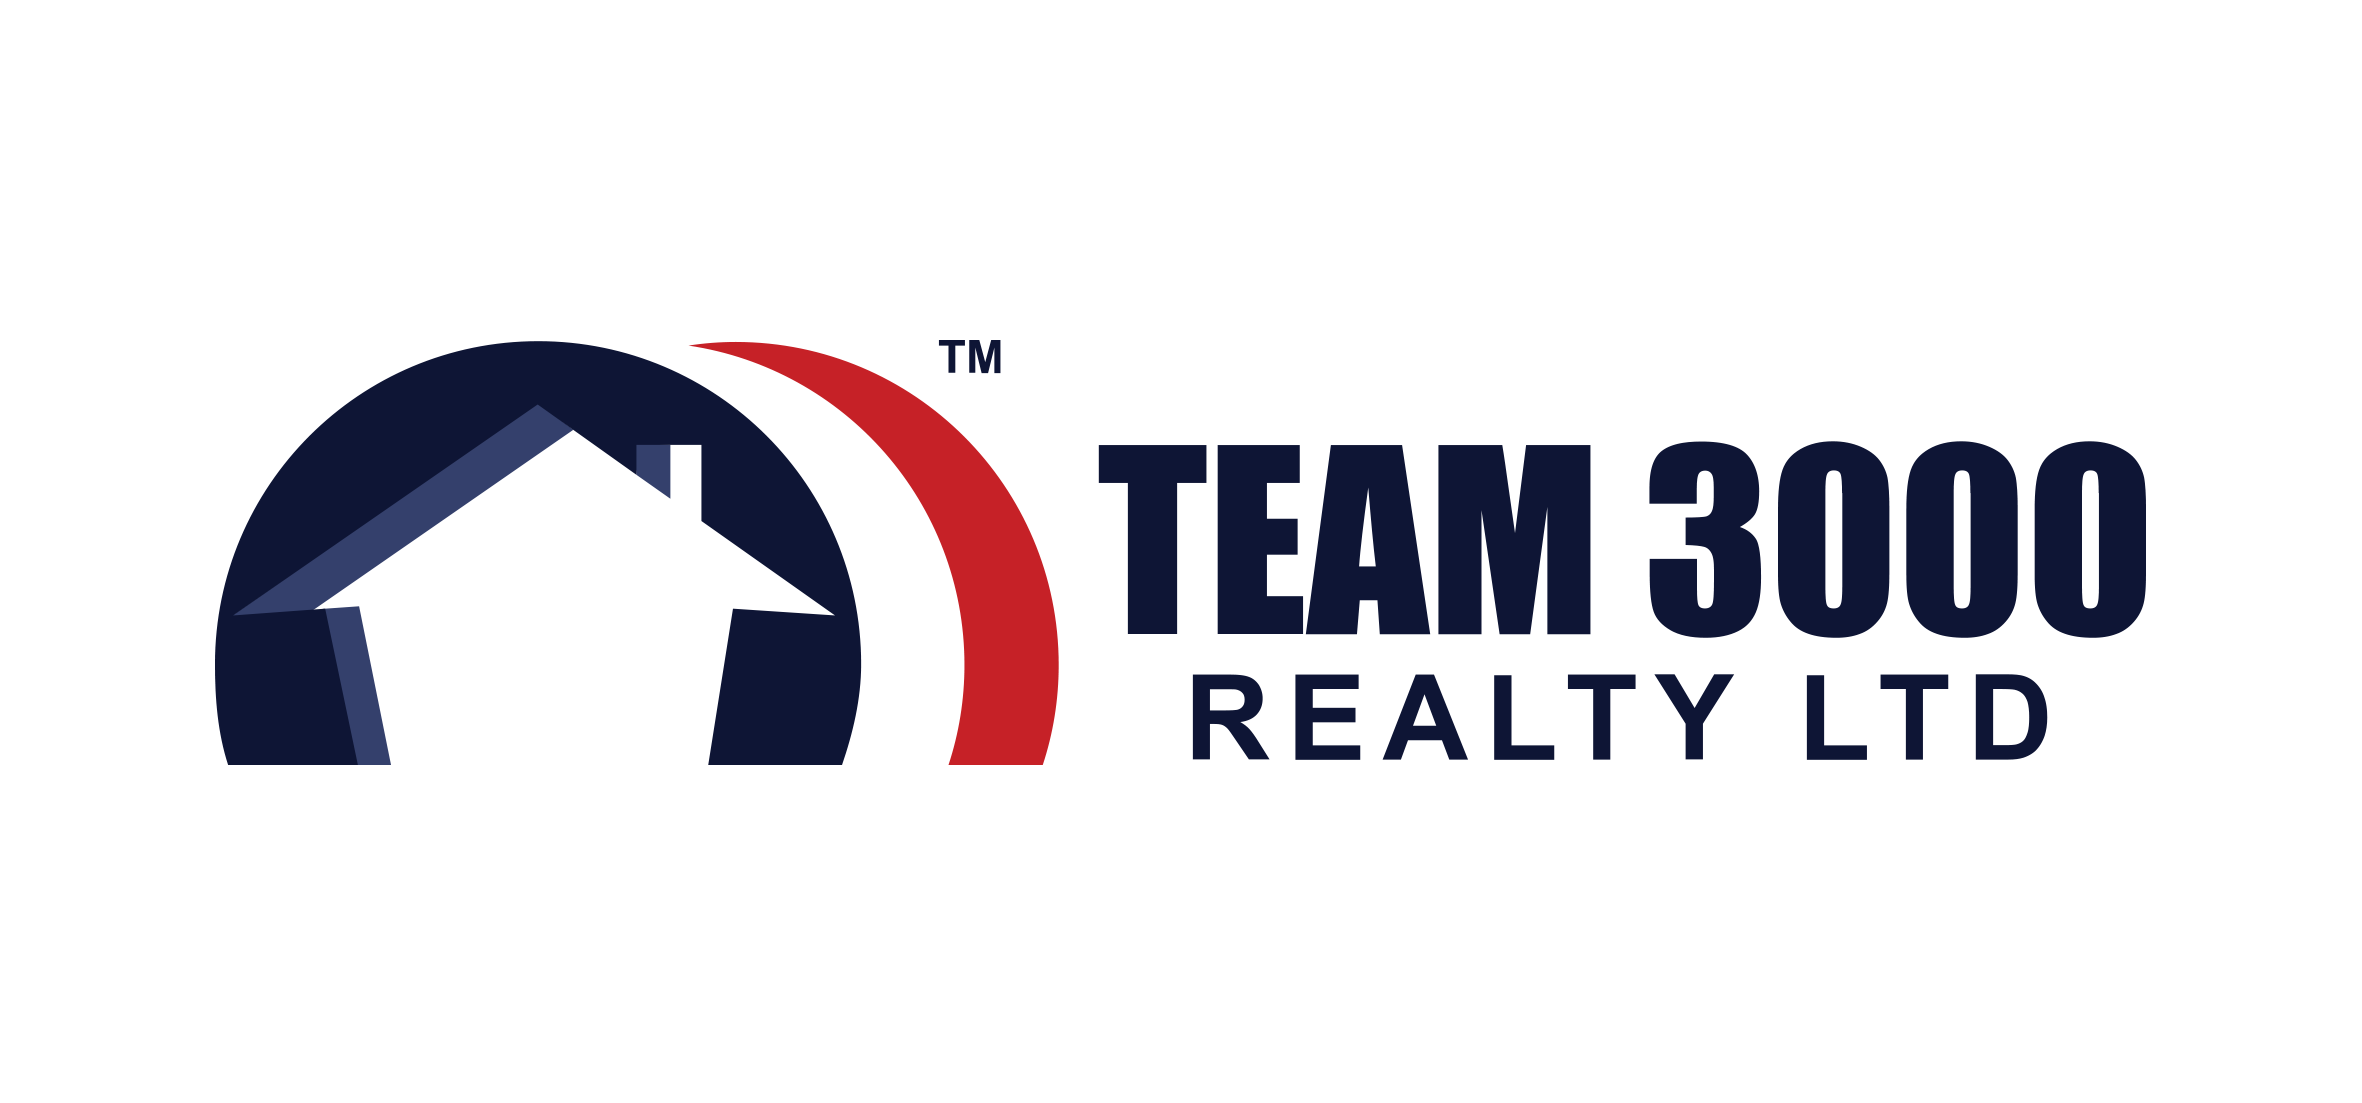 Rikimi Homes with Team 3000 Realty Ltd.